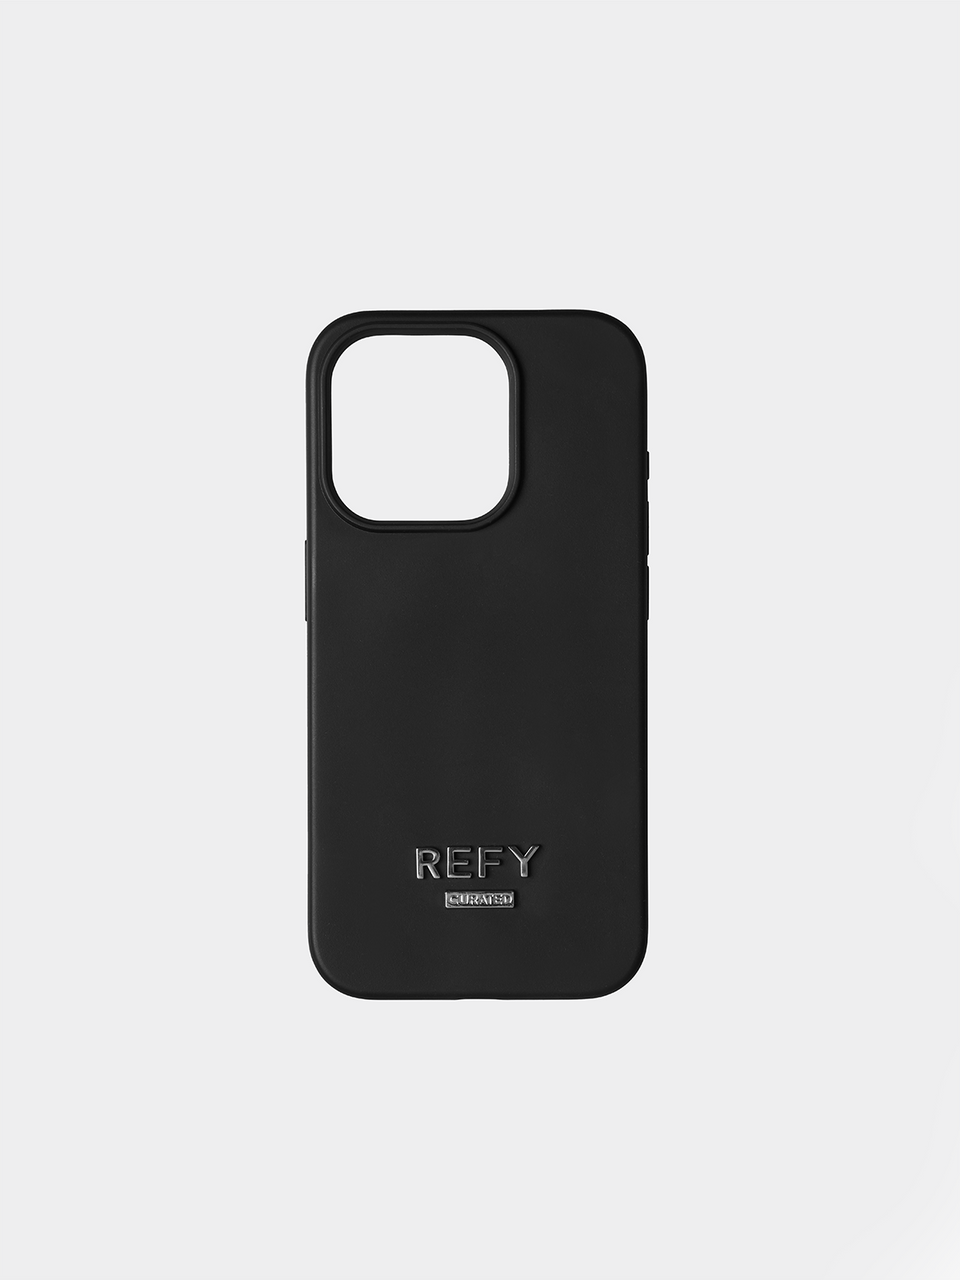 FRONT IMAGE OF REFY CURATED IPHONE CASE